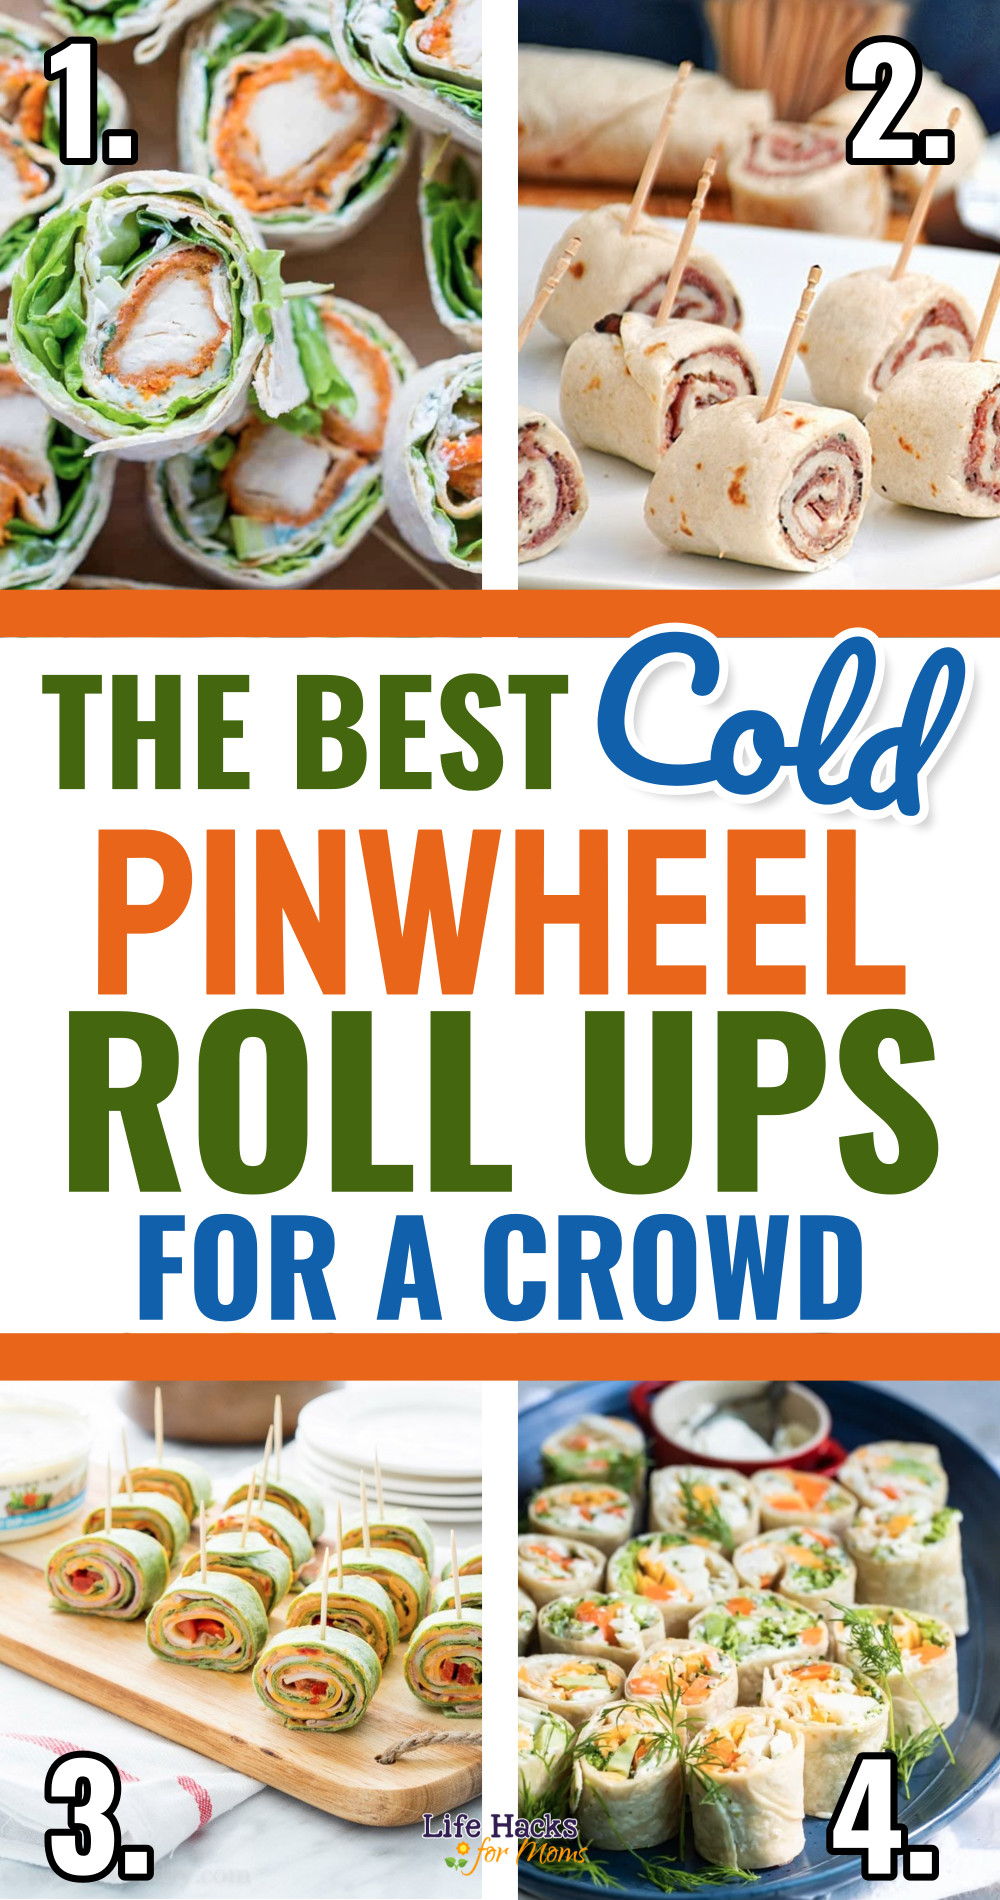 cold pinwheel rollups to feed a crowd